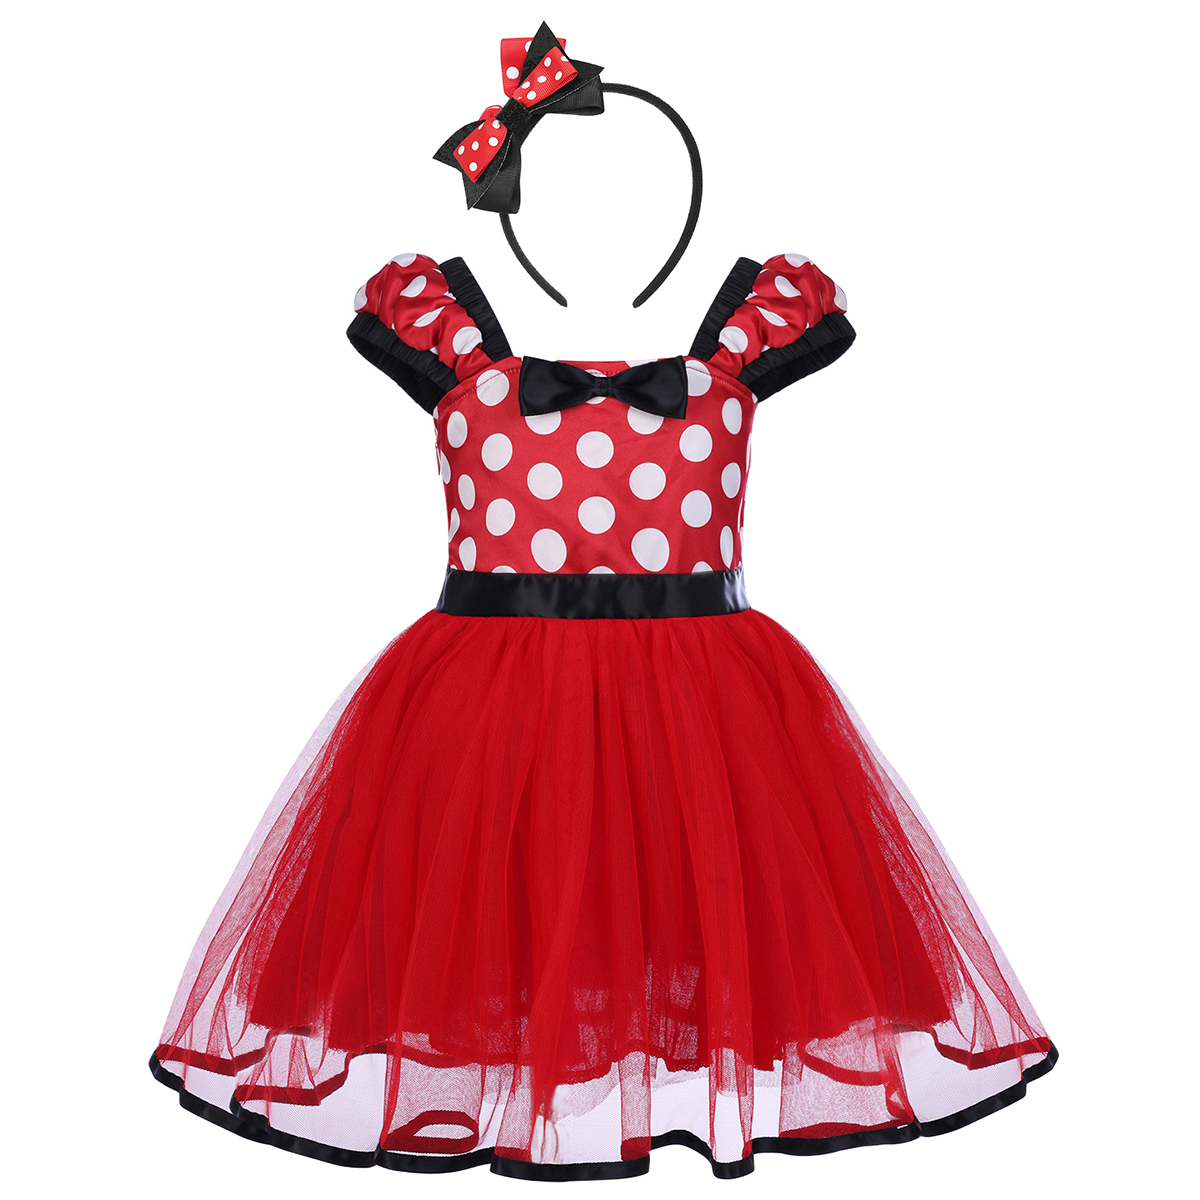 IBTOM CASTLE Toddler Girls Polka Dots Princess Party Cosplay Pageant Fancy Dress up Birthday Tutu Dress + Ears Headband Outfit Set 3-4 Years Red - image 1 of 8